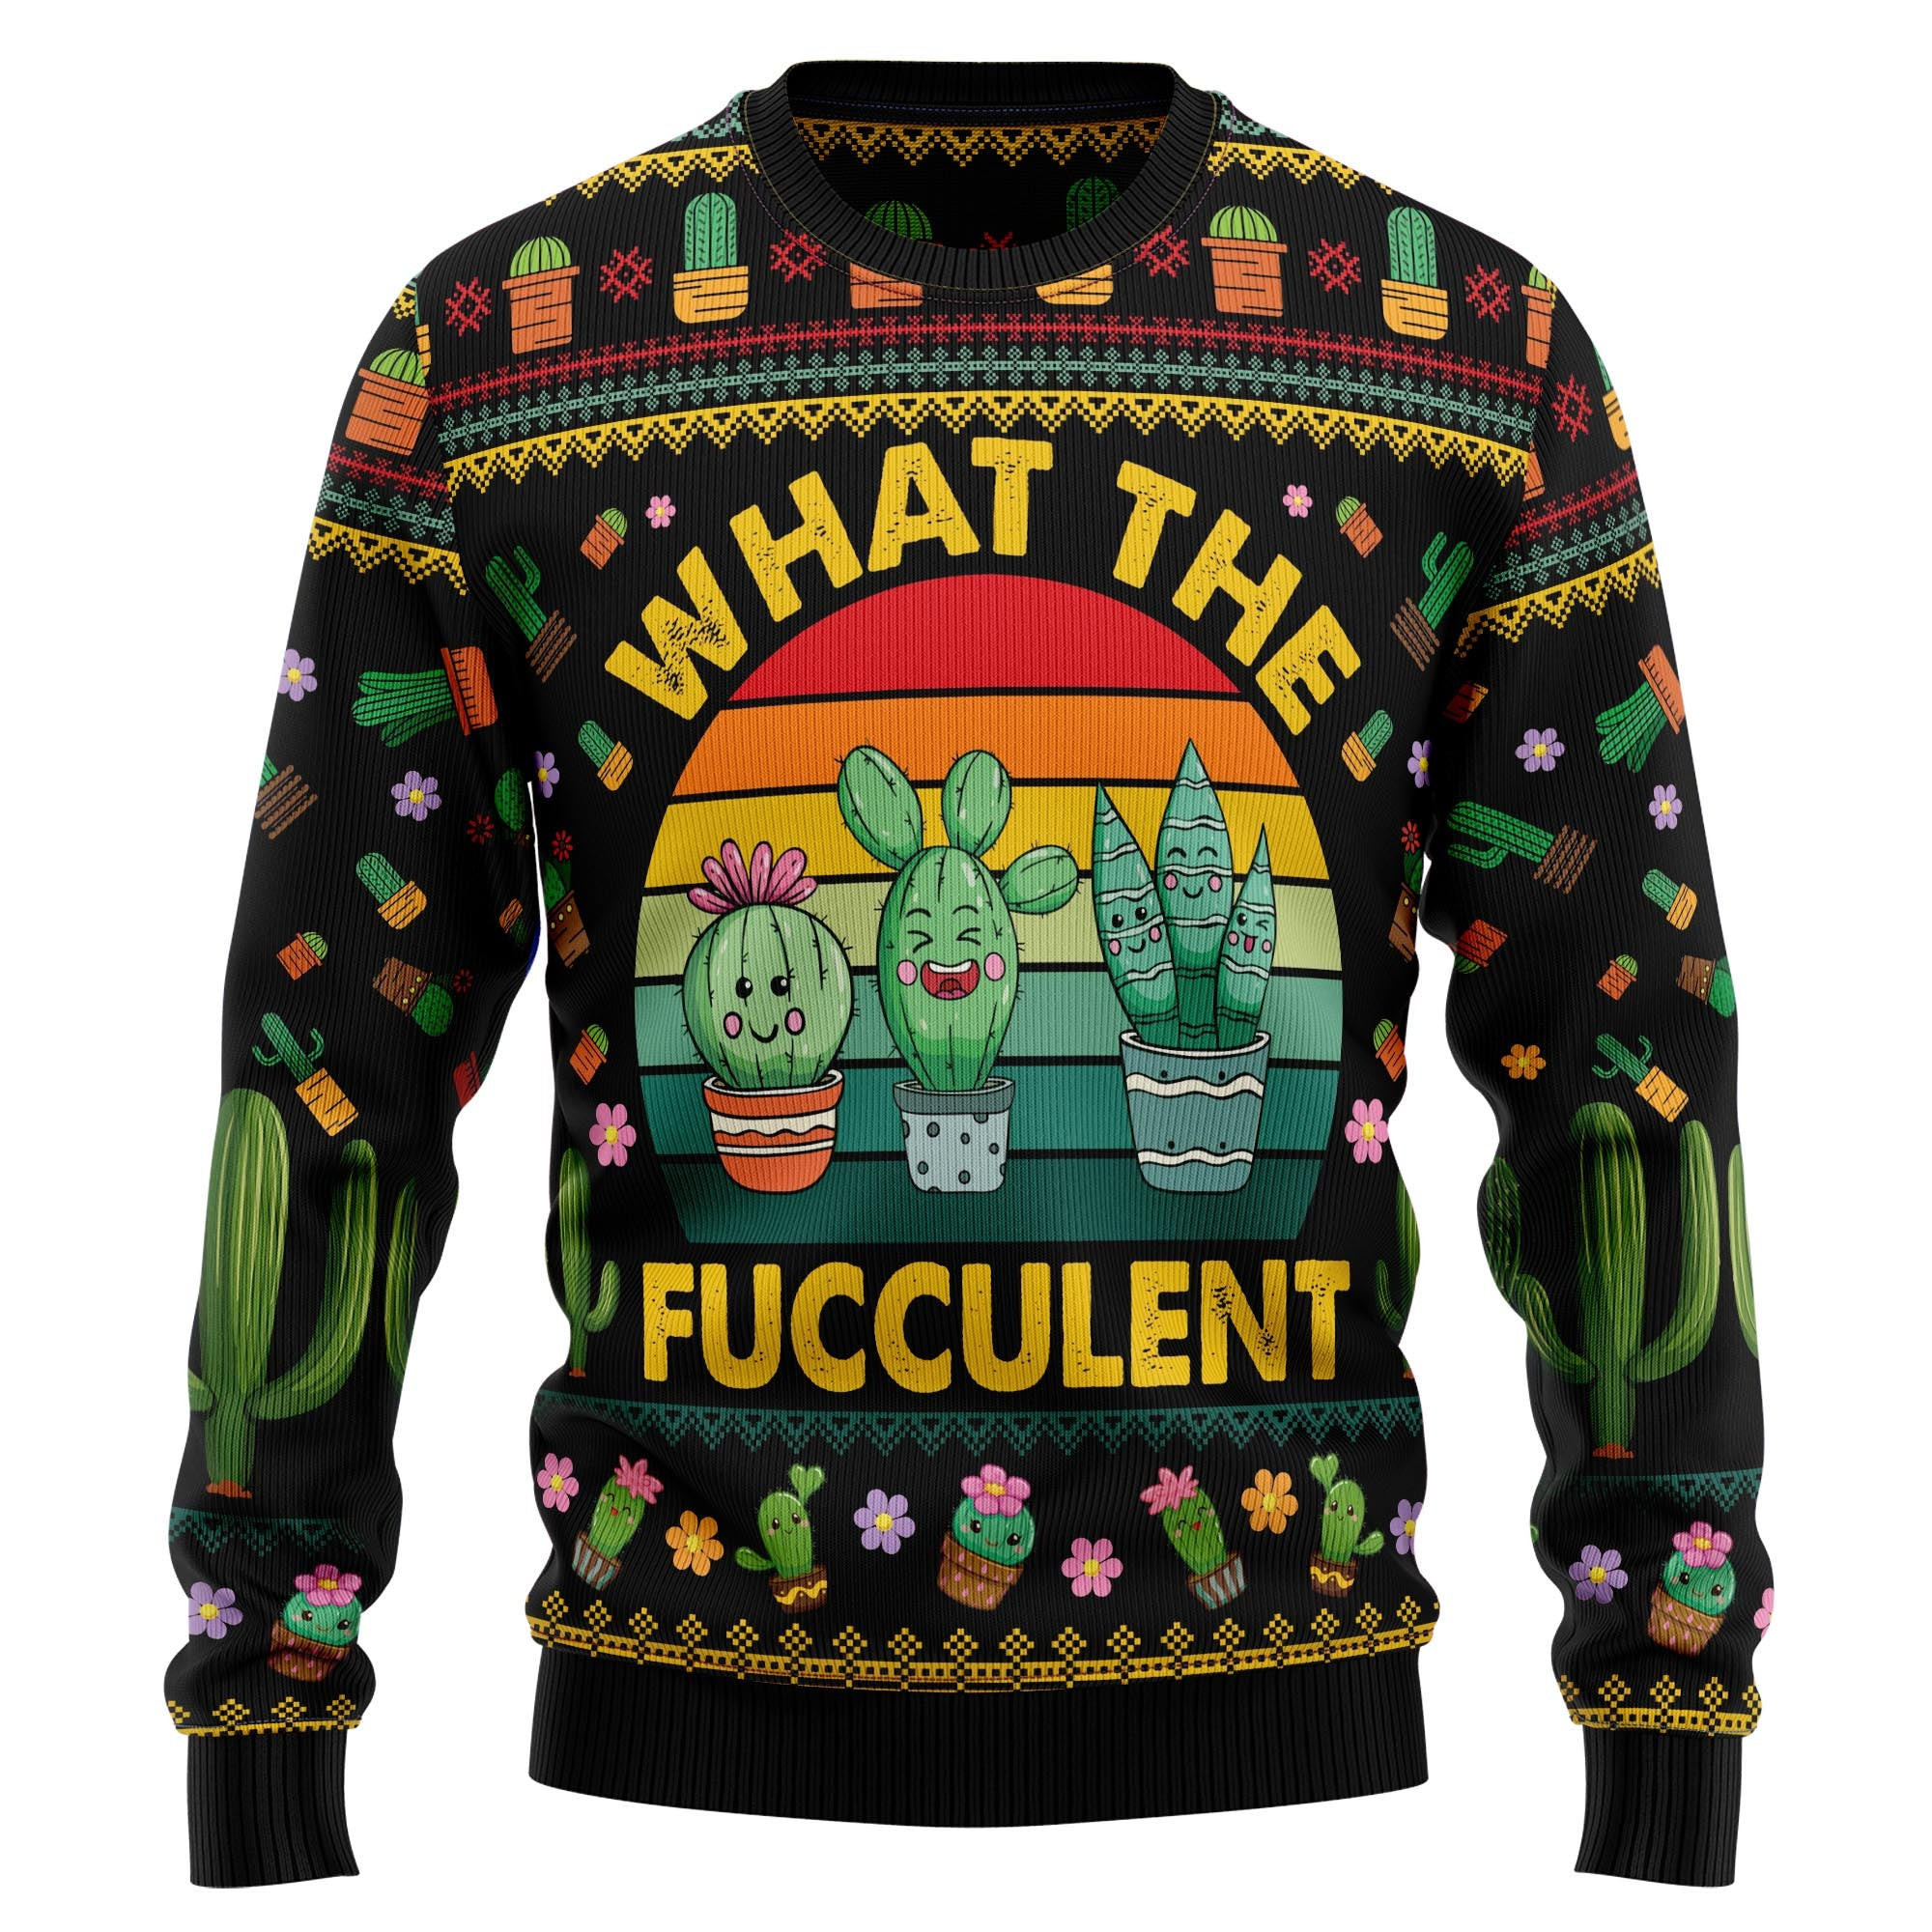 Cactus What the Fucculent Ugly Christmas Sweater, Ugly Sweater For Men Women, Holiday Sweater